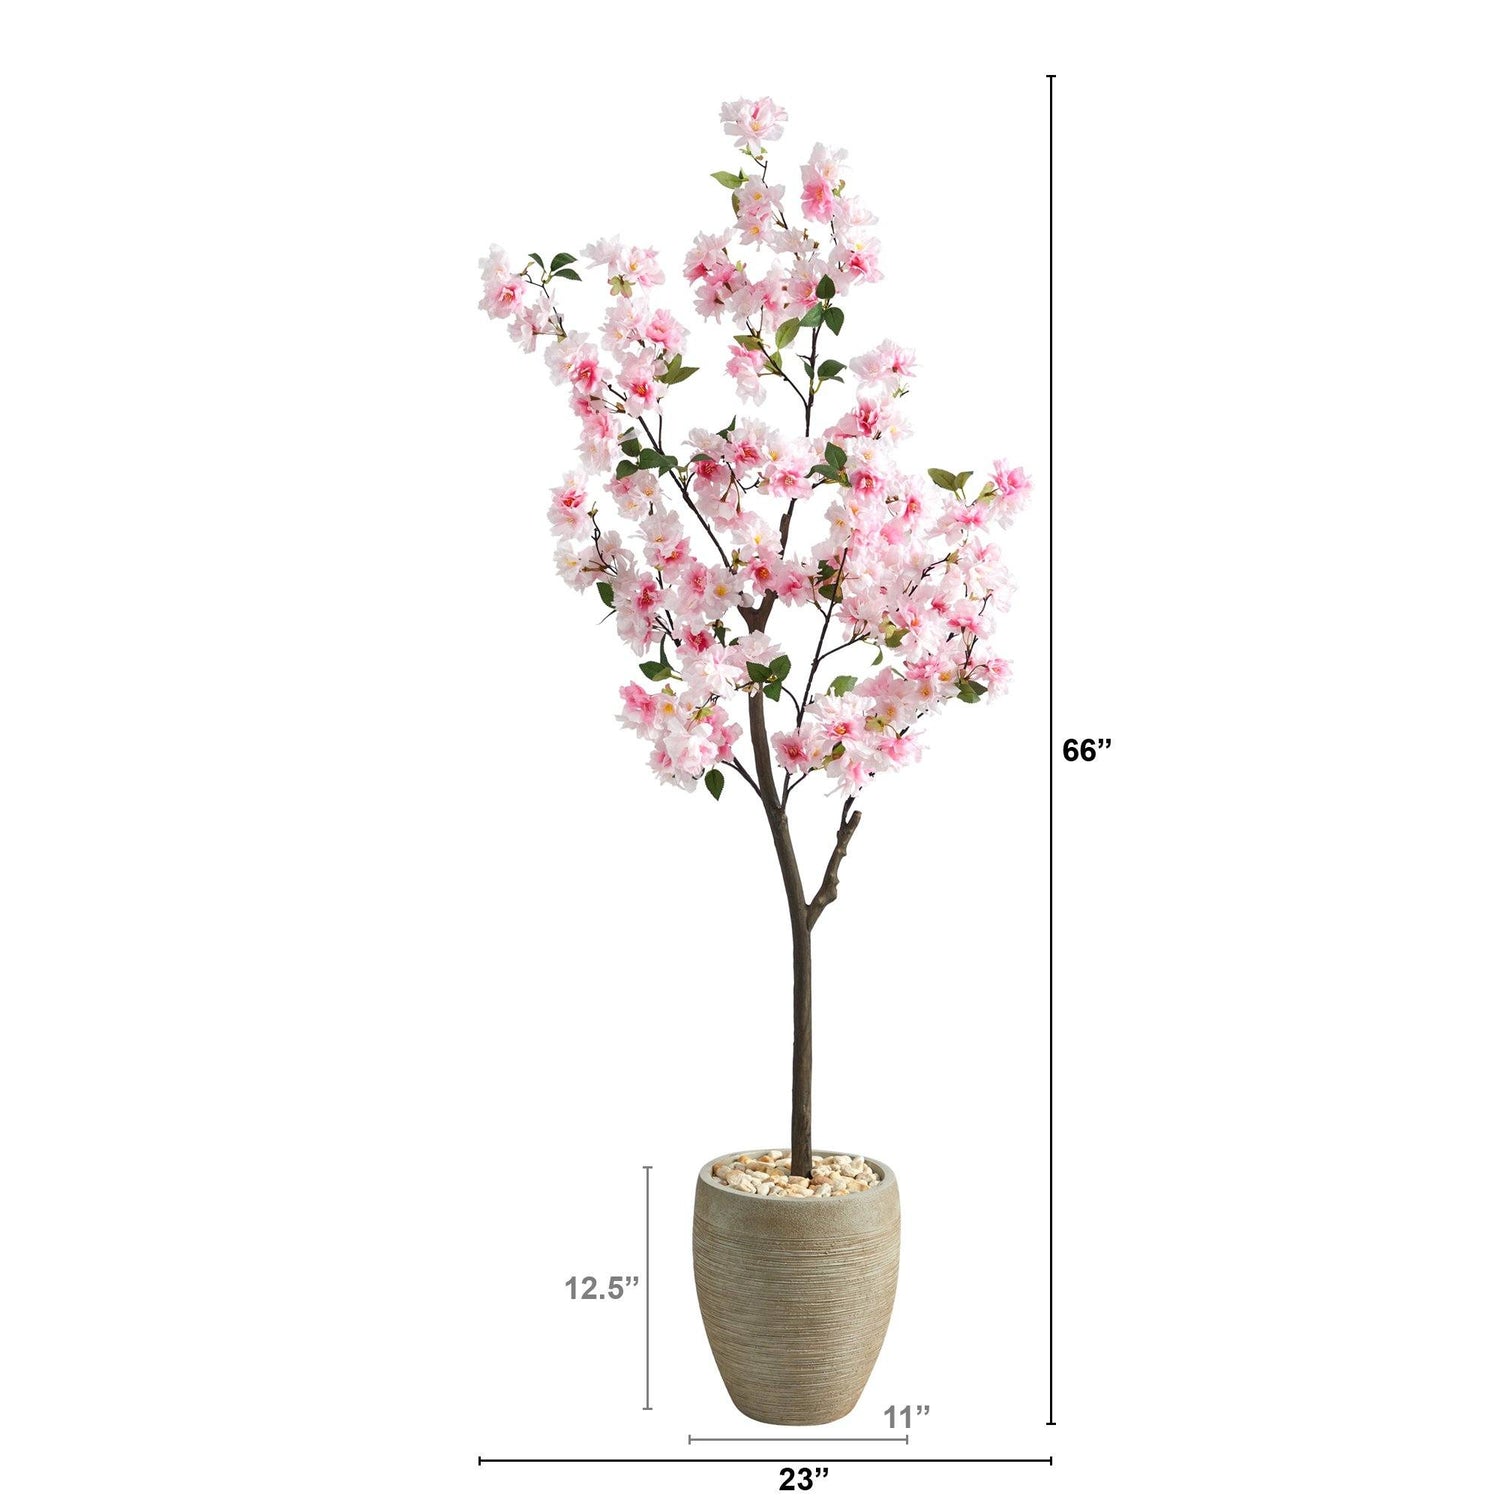 5.5’ Cherry Blossom Artificial Tree in Sand Colored Planter